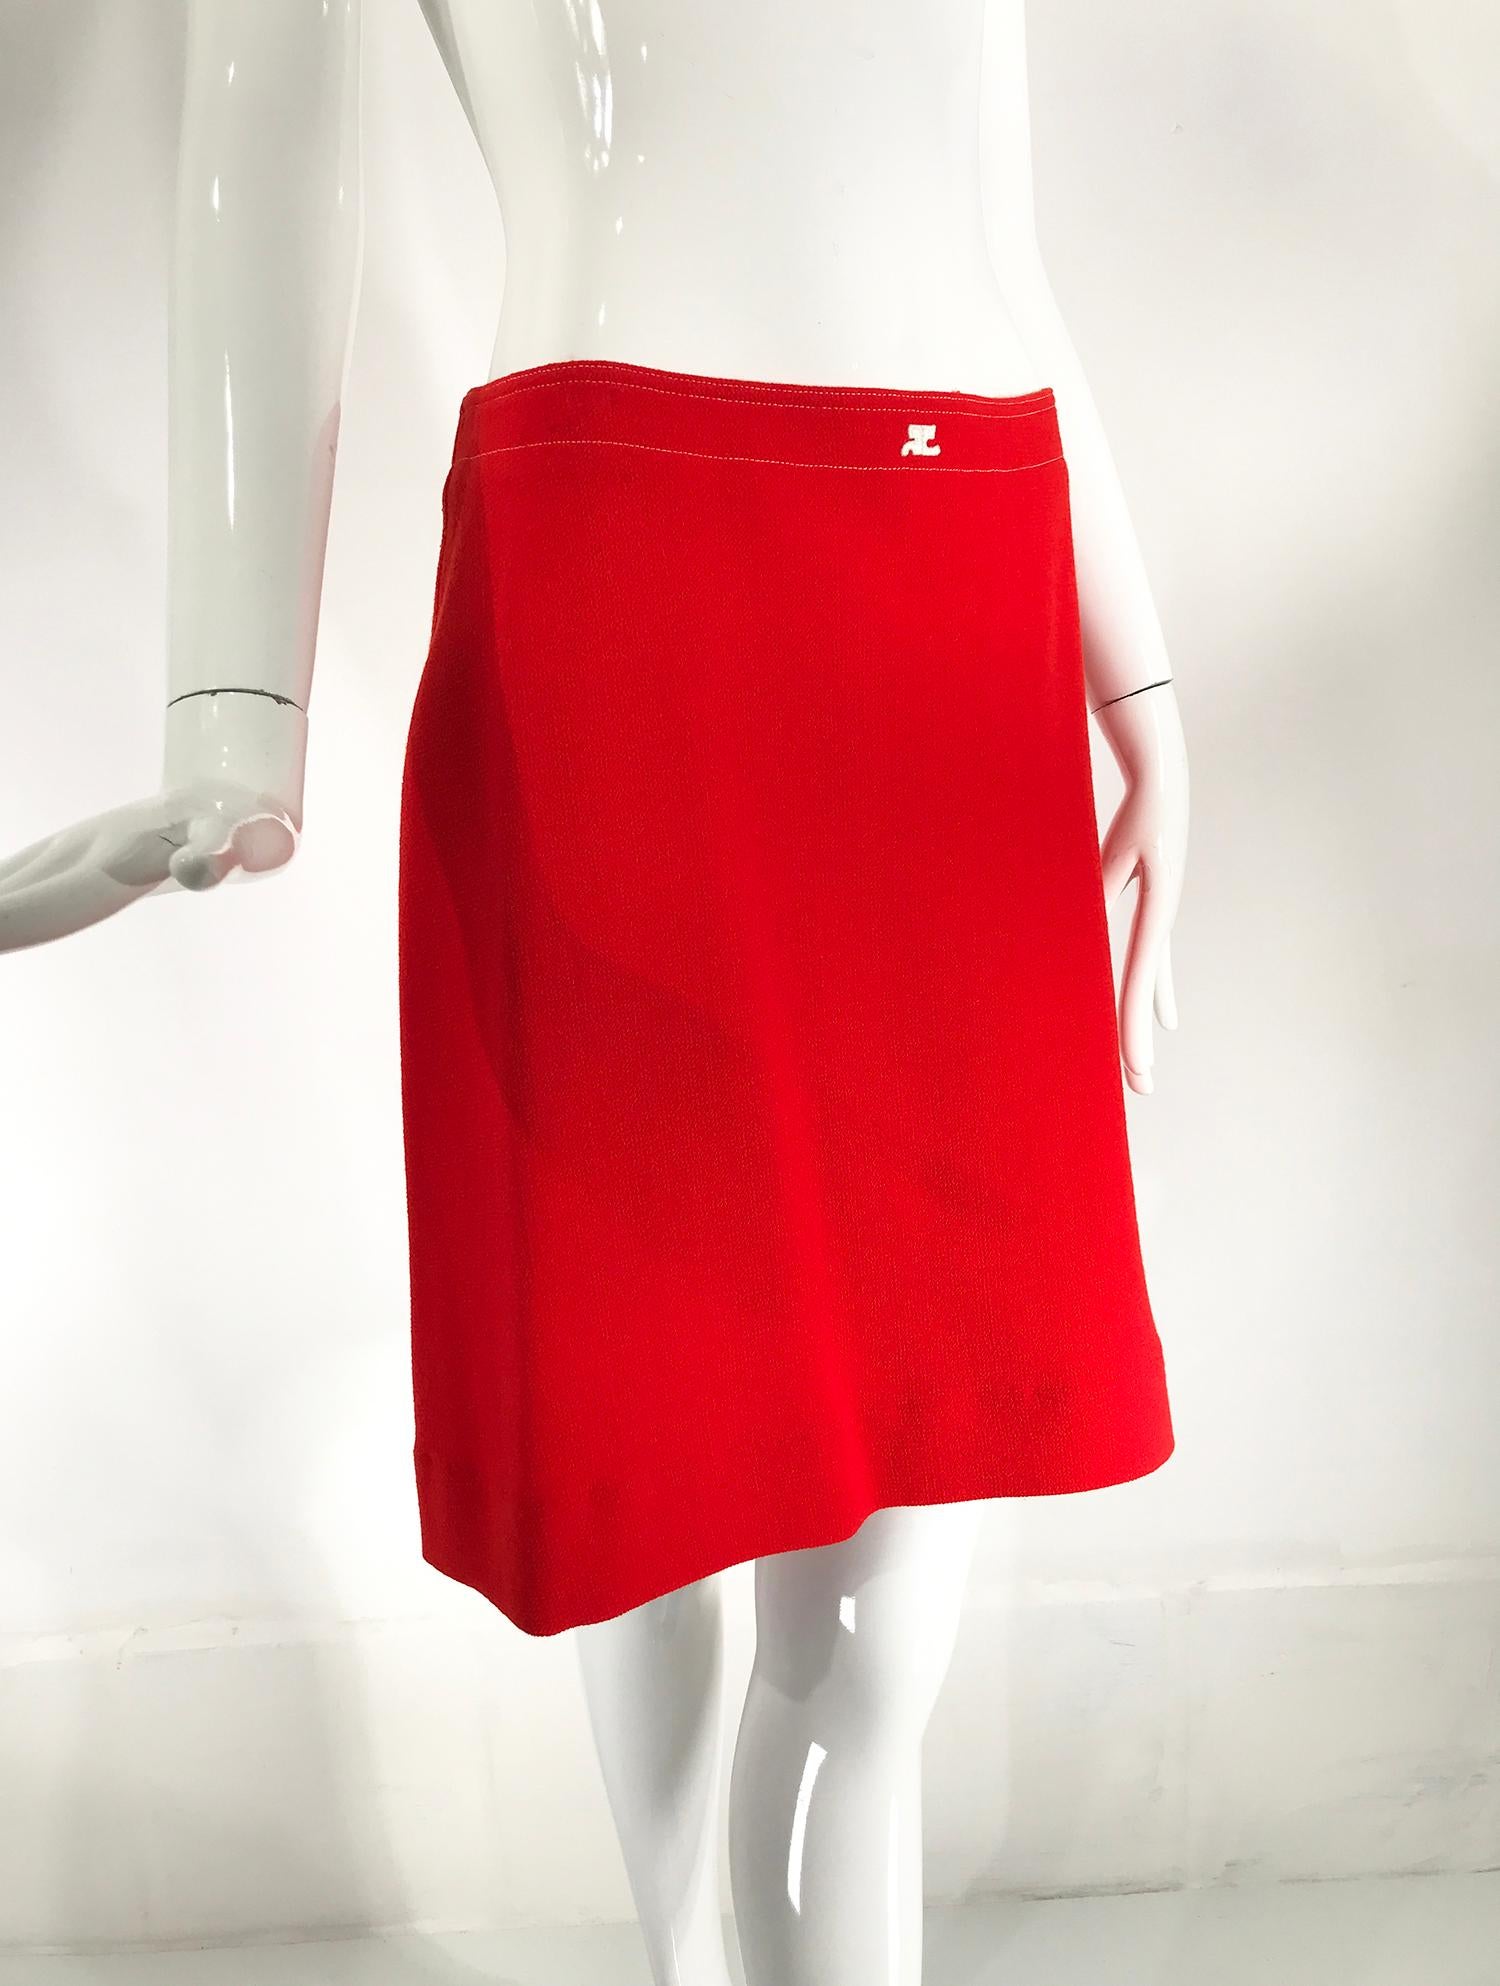 Courreges orange wool A line skirt with white top stitching marked size 42 from the 1990s. Contoured, top stitched waist band waist with logo applique at the front. Back sides top stitched seams, the left set with an invisible zipper. Lined in white